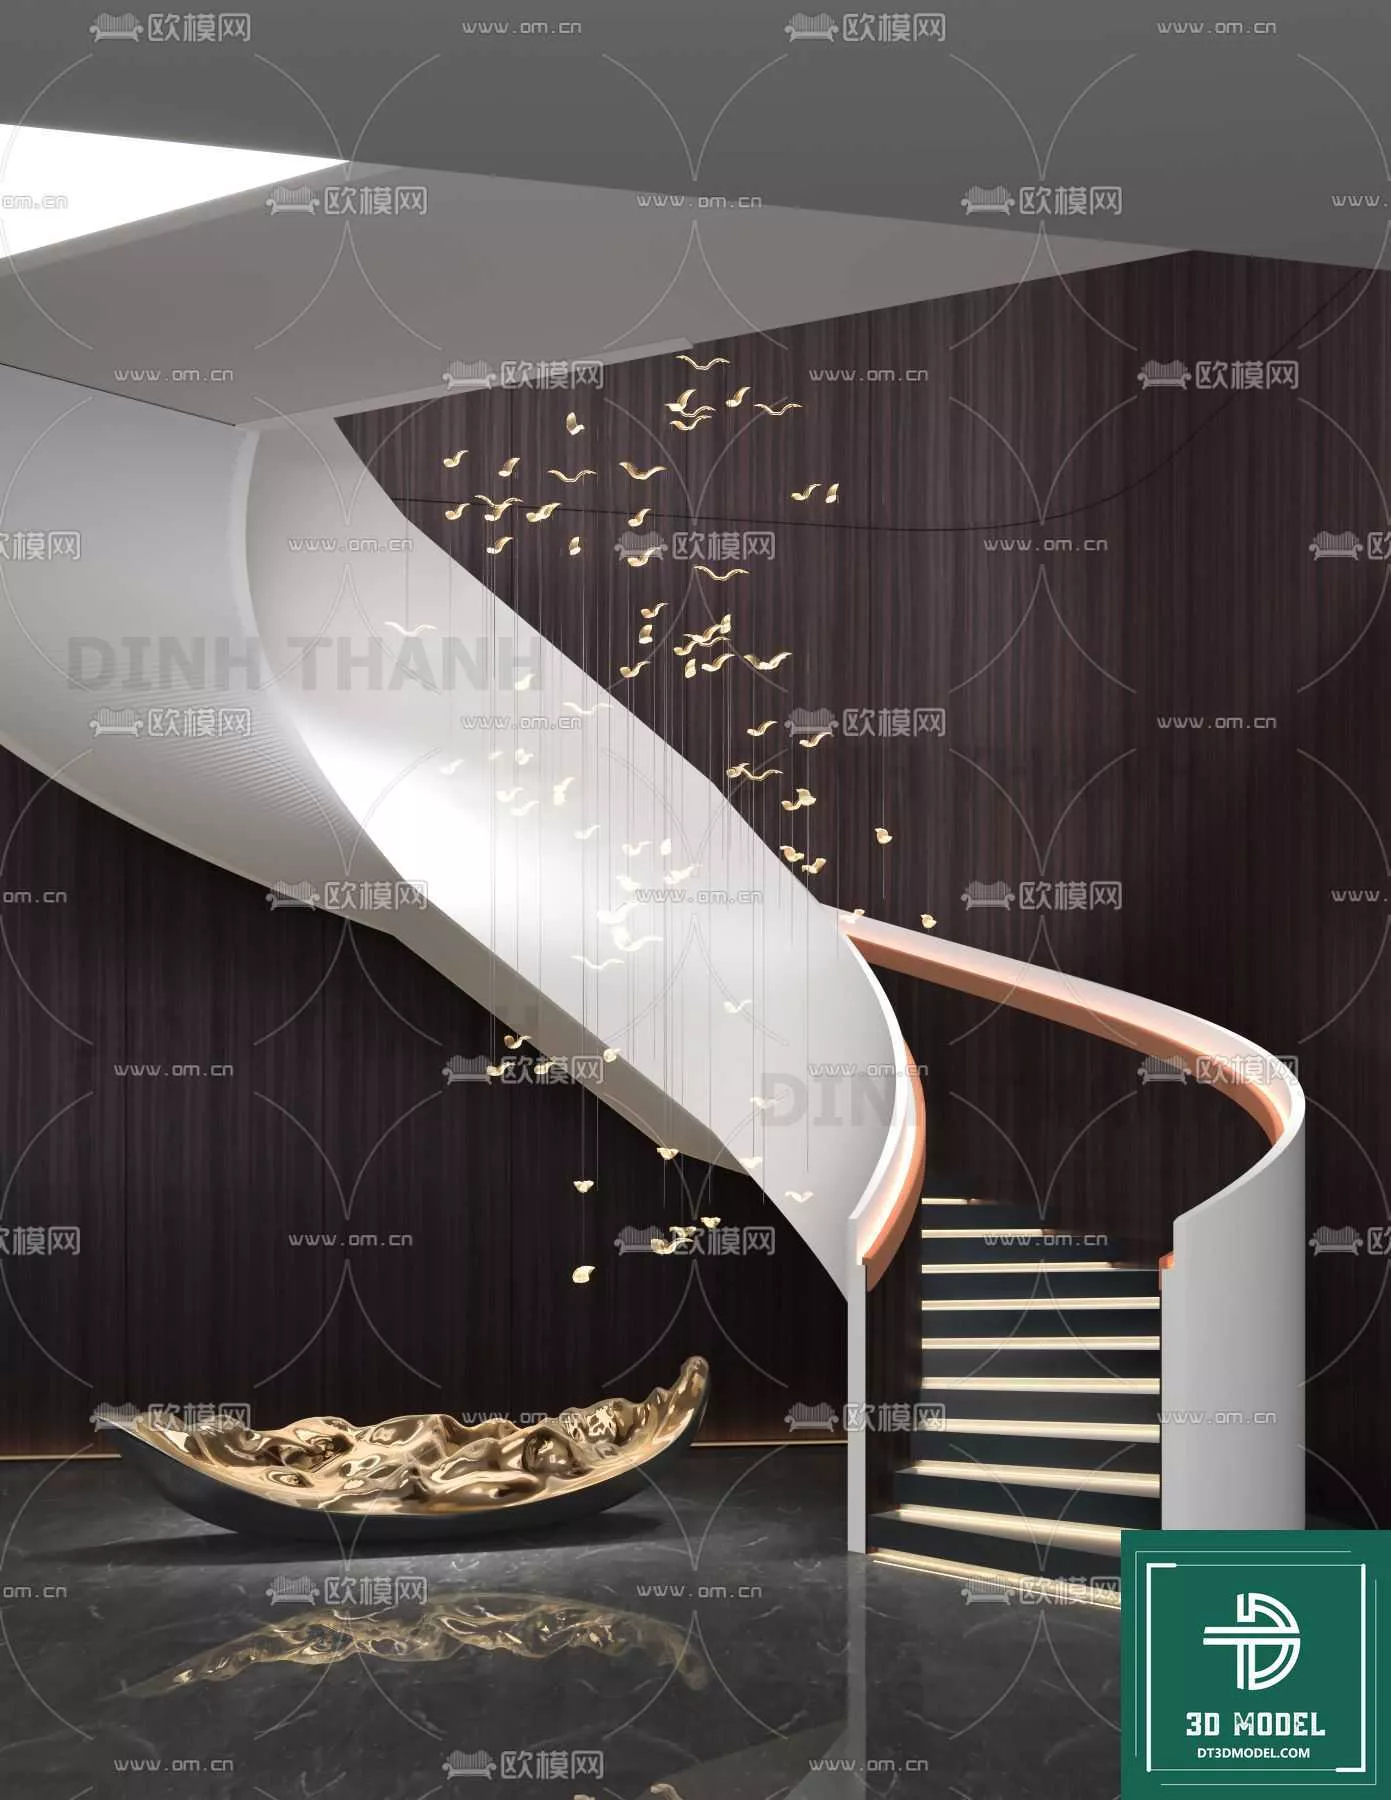 MODERN STAIR - SKETCHUP 3D MODEL - VRAY OR ENSCAPE - ID14124